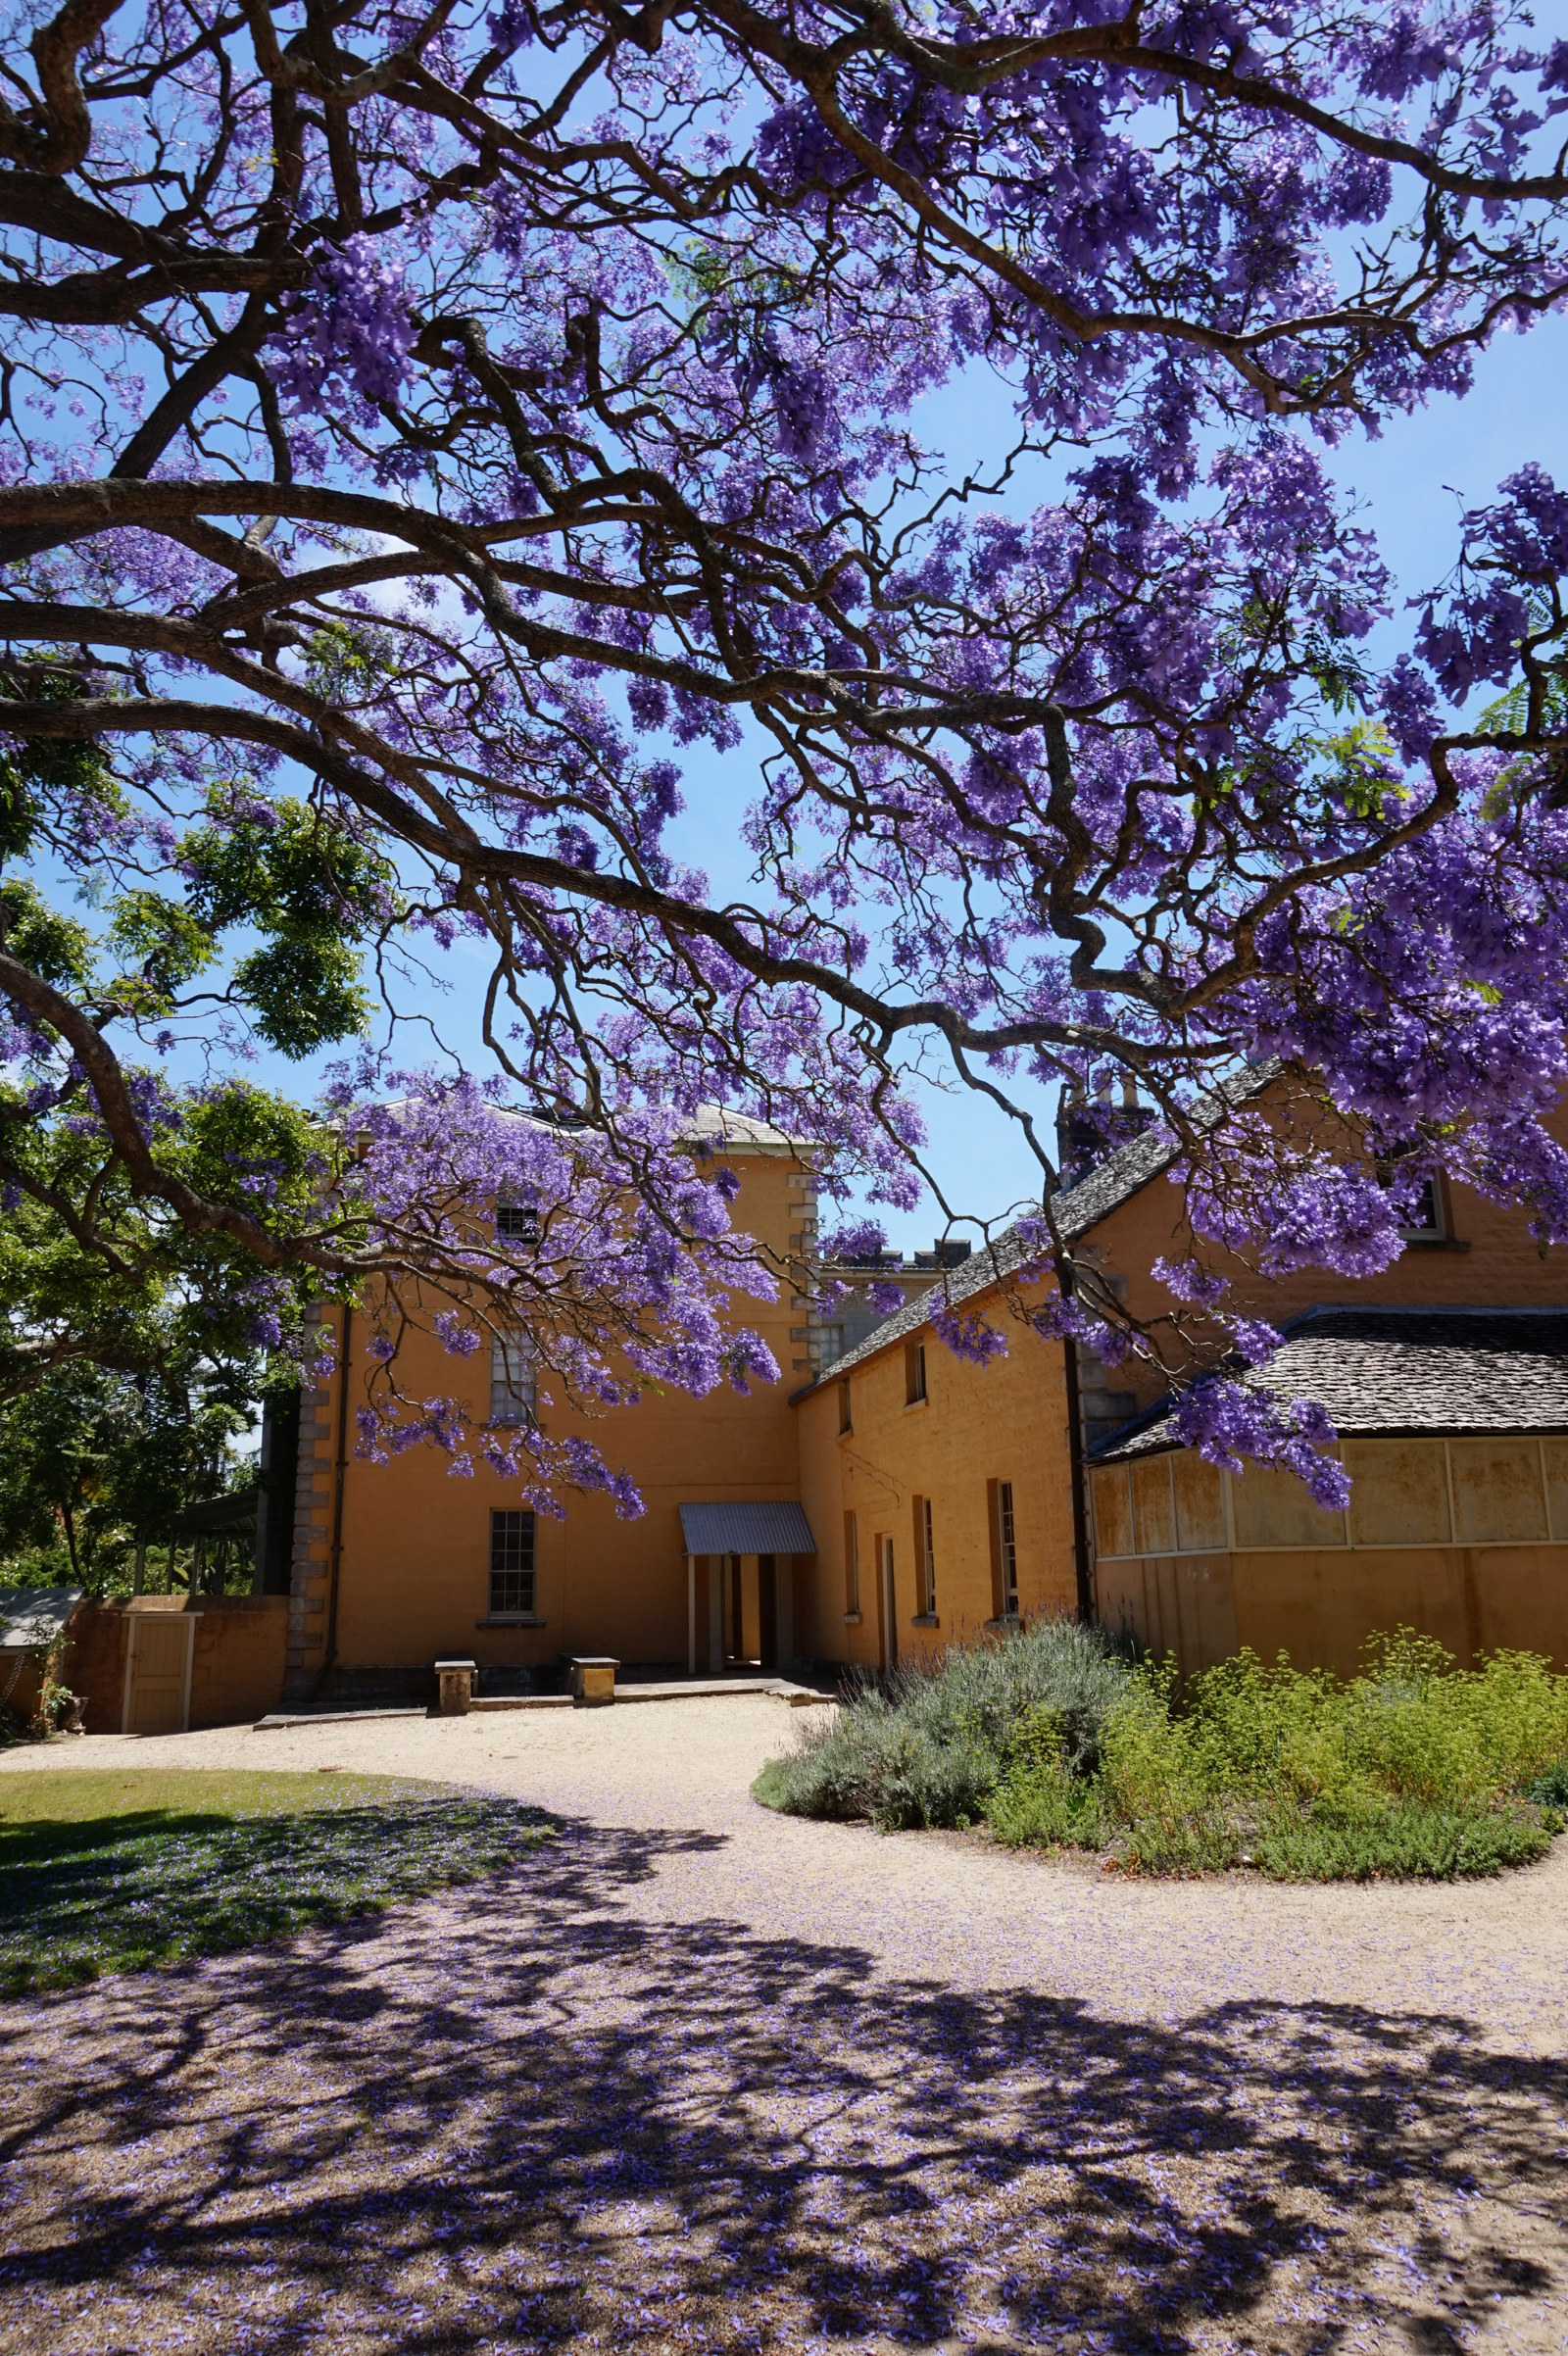 A jacaranda in flower in the courtyard at Vaucluse House.